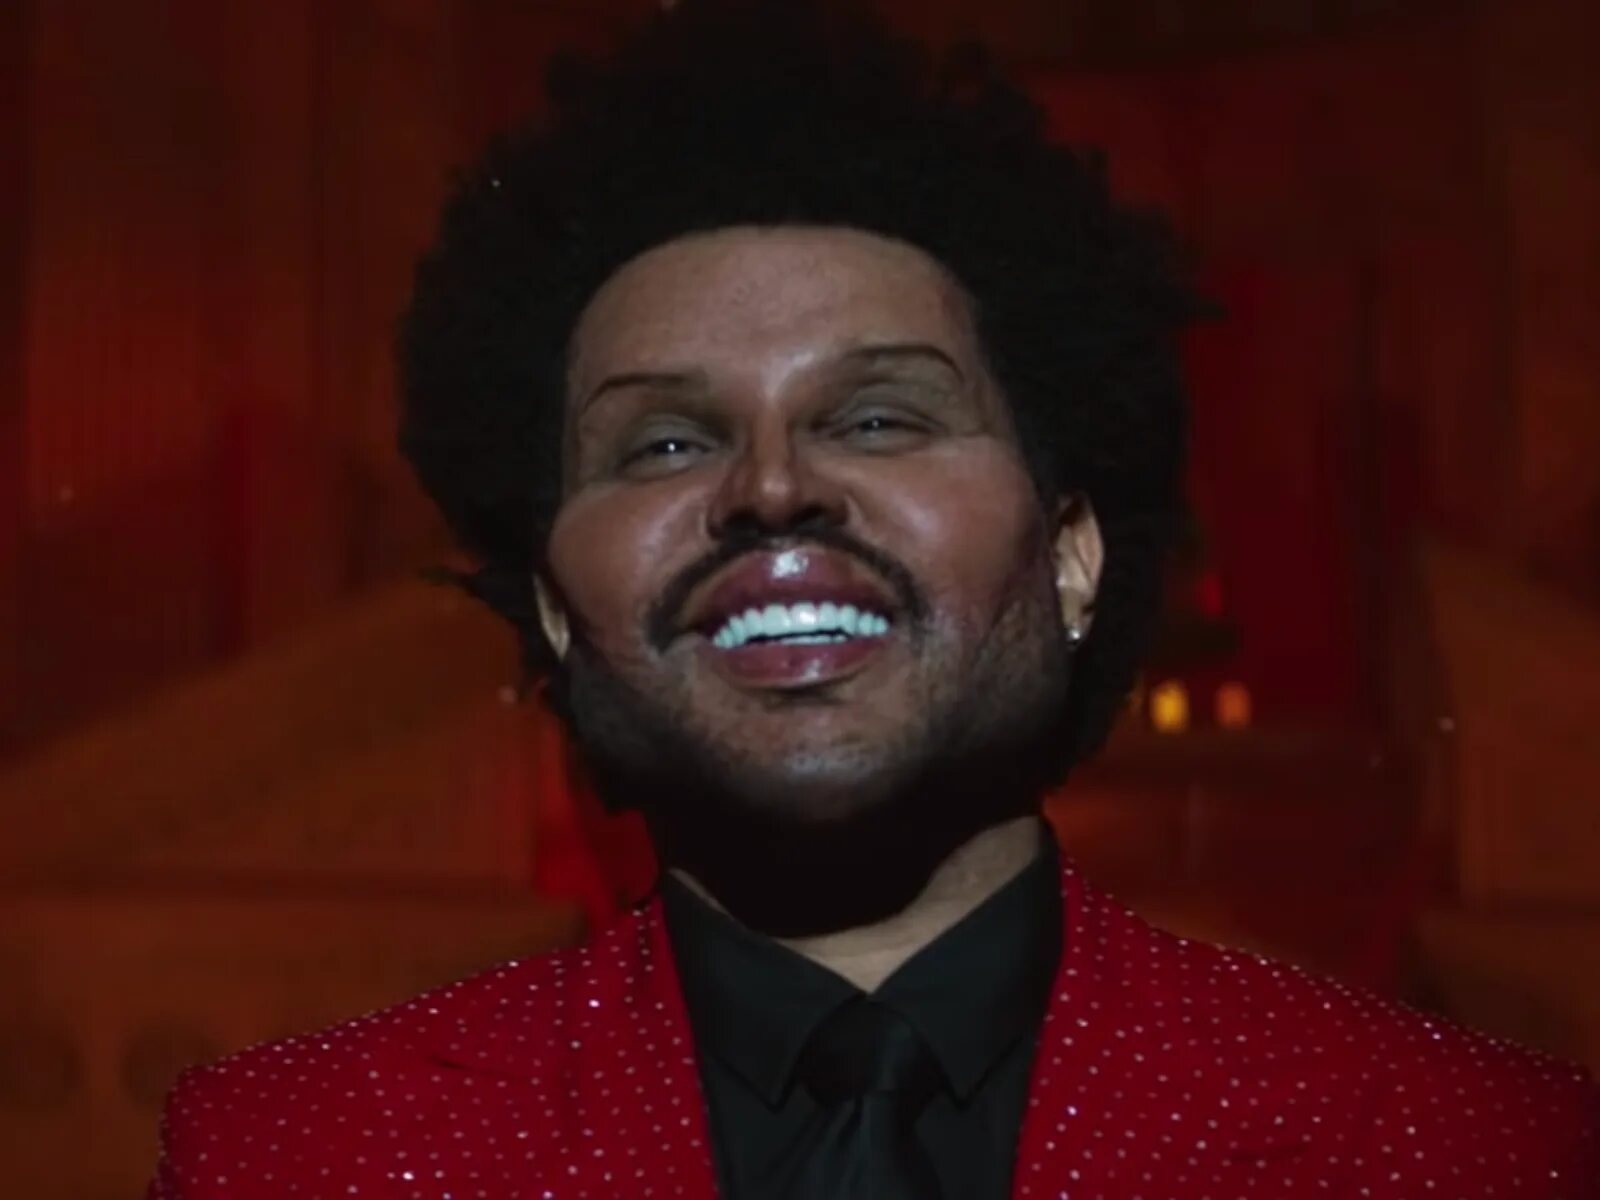 The Weeknd 2021. The Weeknd 2021 face. The Weeknd фото 2021. The Weeknd певец 2020.